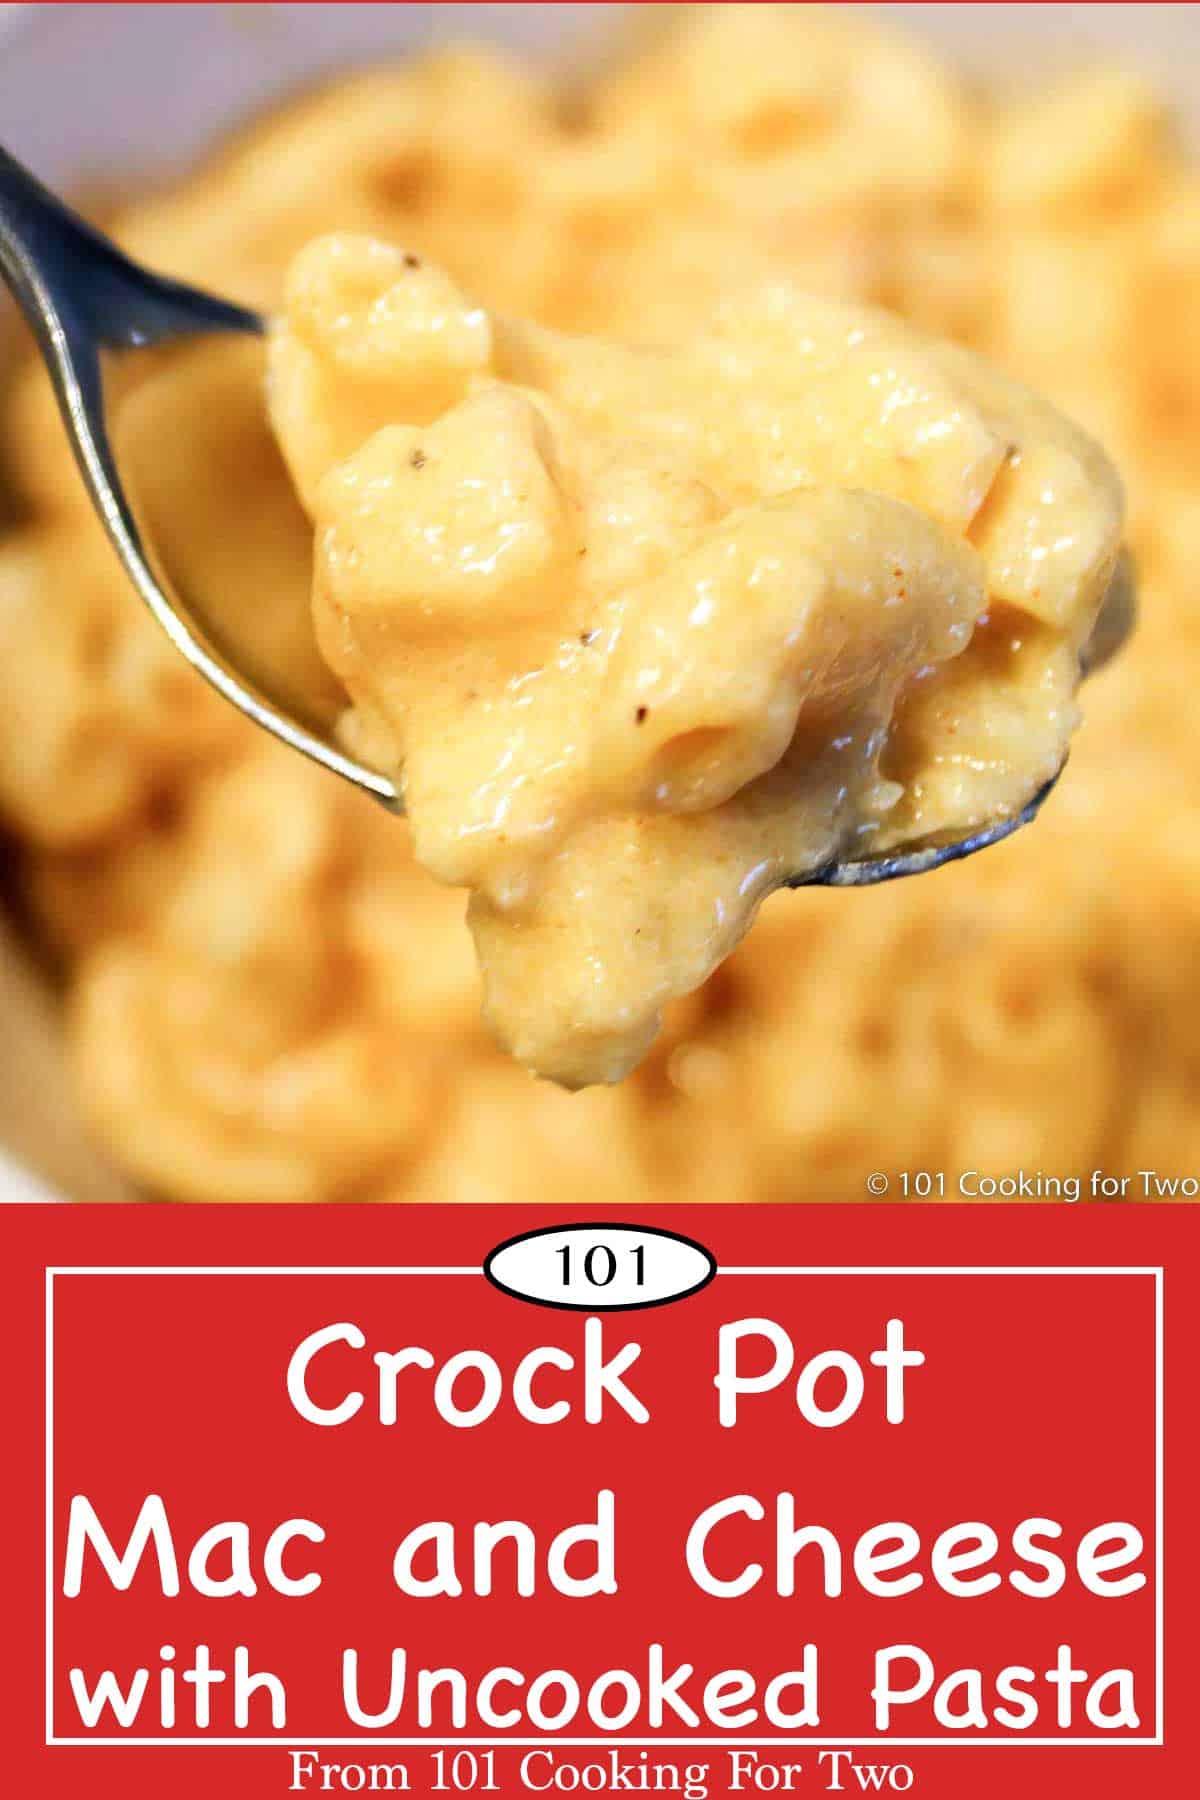 Crock Pot Mac and Cheese with Uncooked Pasta - 101 Cooking For Two